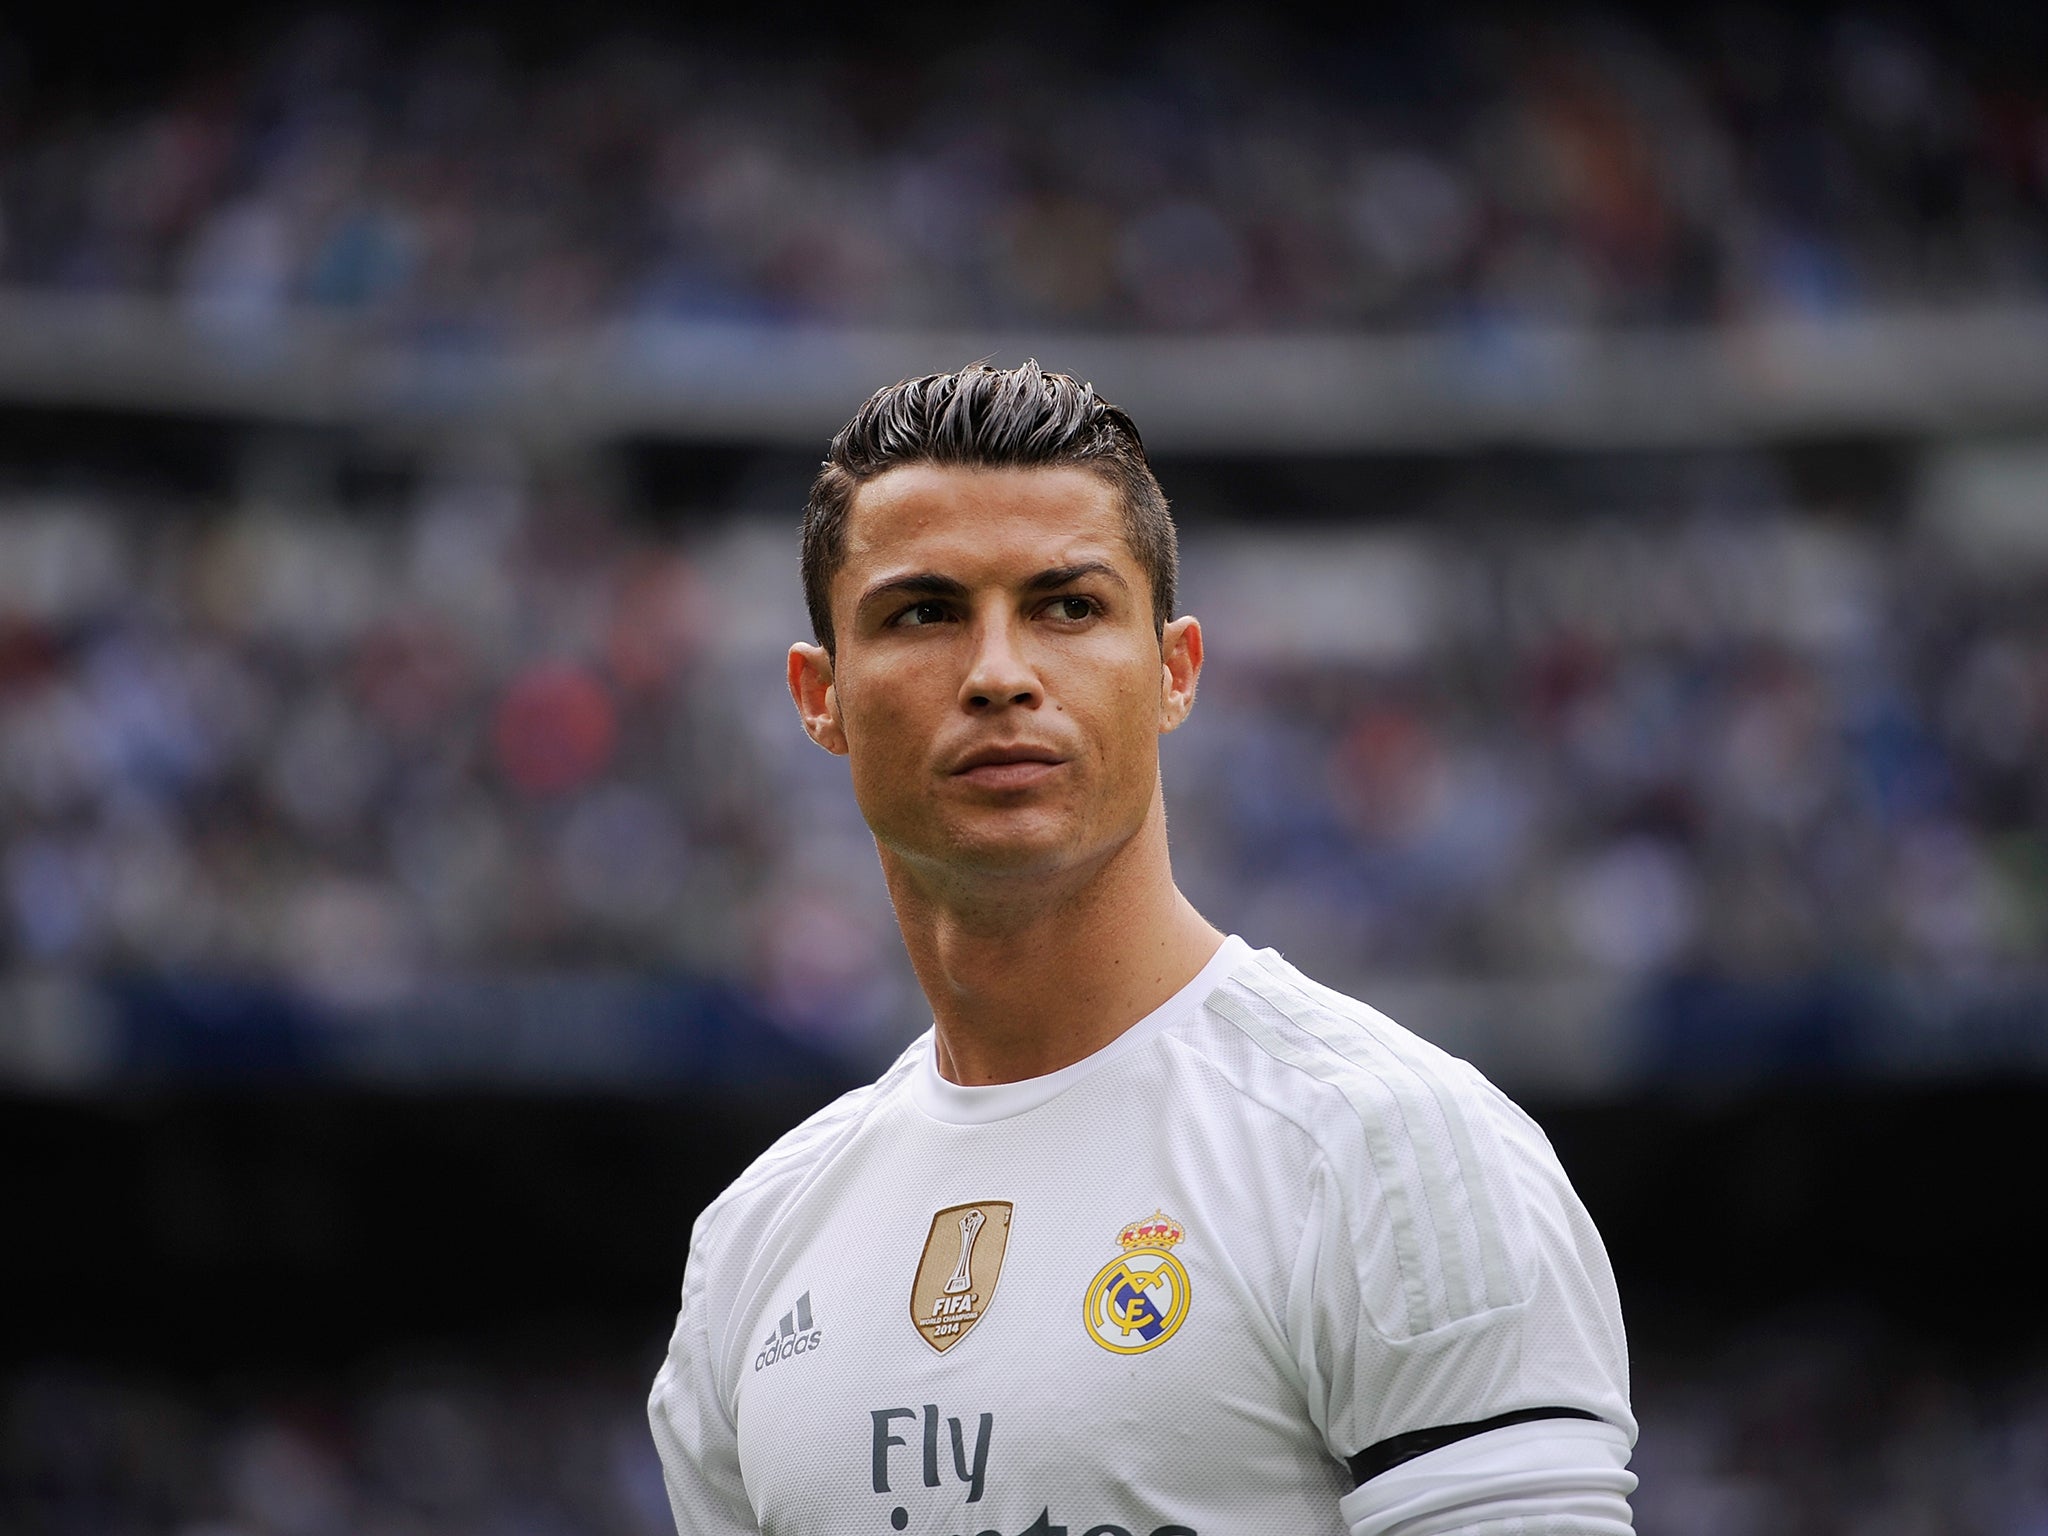 Ronaldo has been strongly linked with a move after enduring an unusually goal-shy run